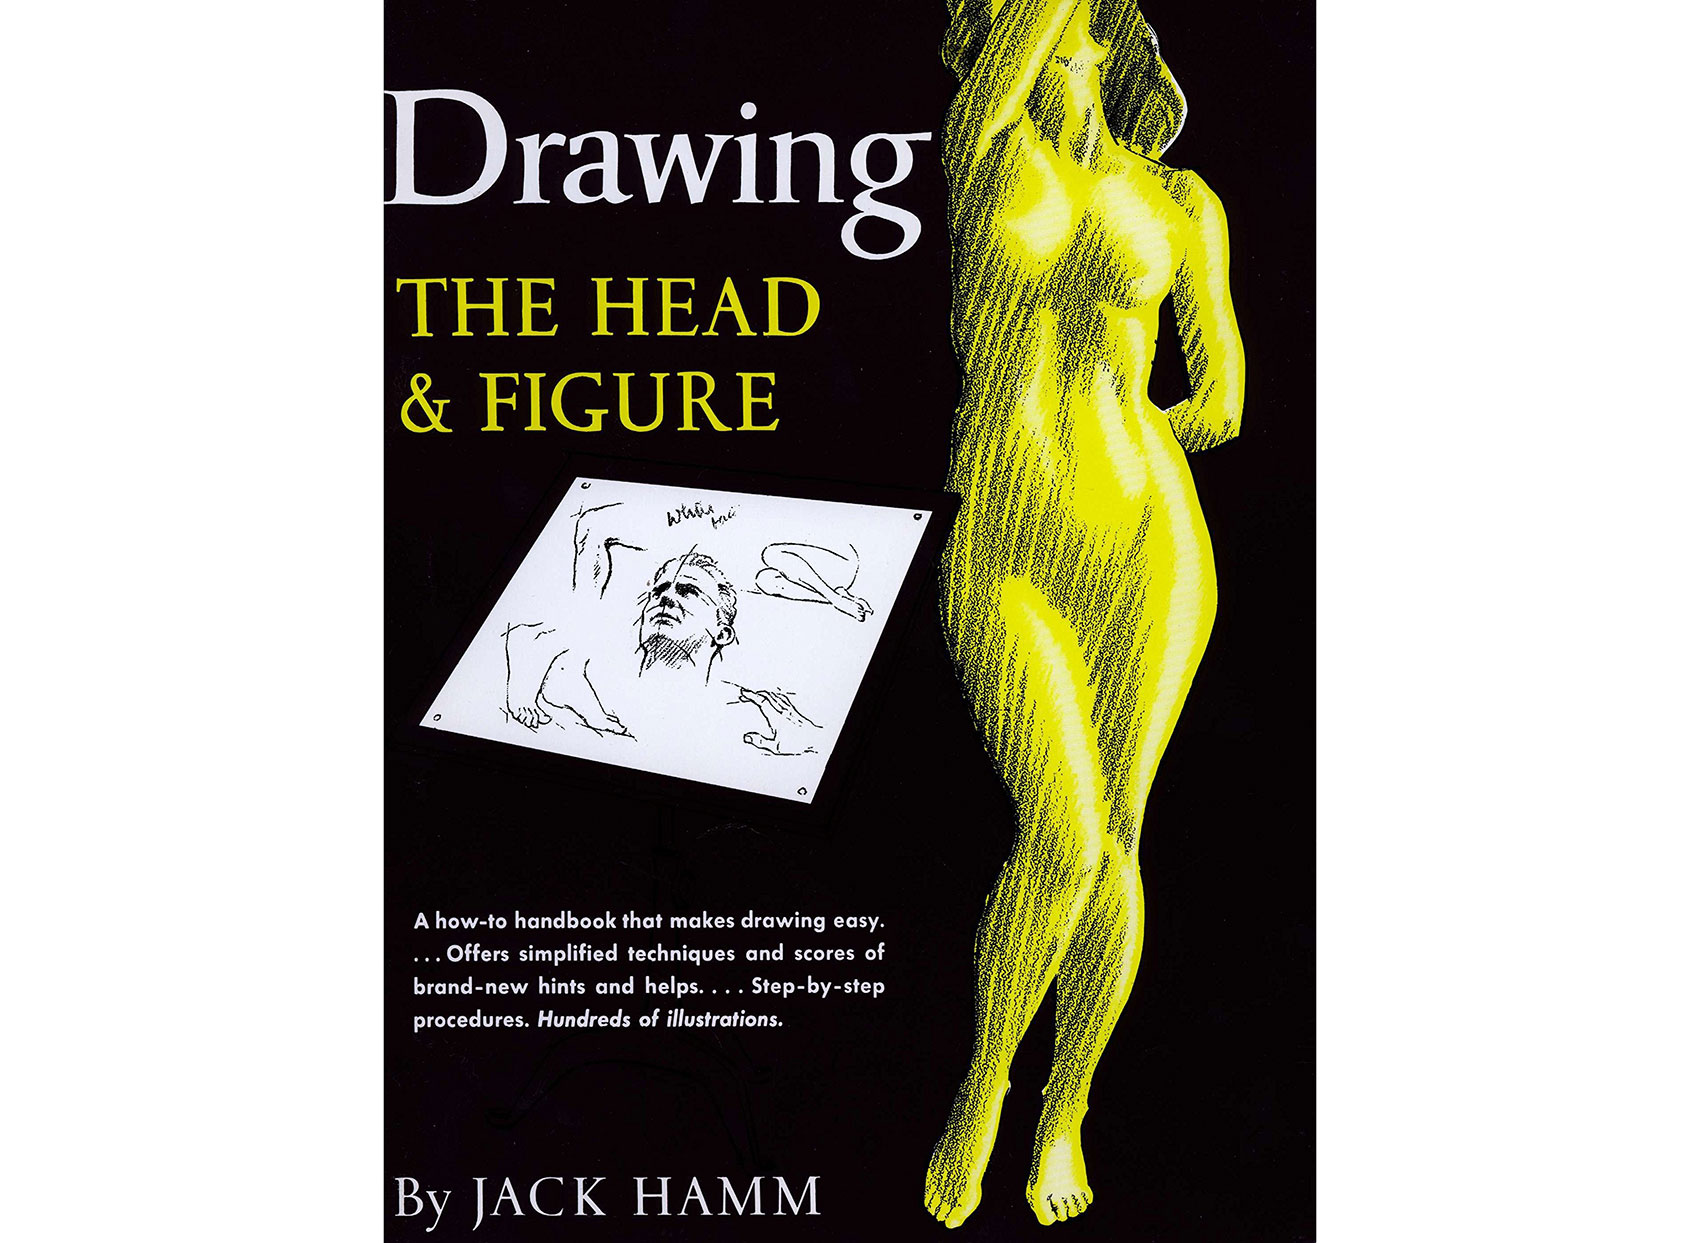 Best drawing books: Drawing the head and figure